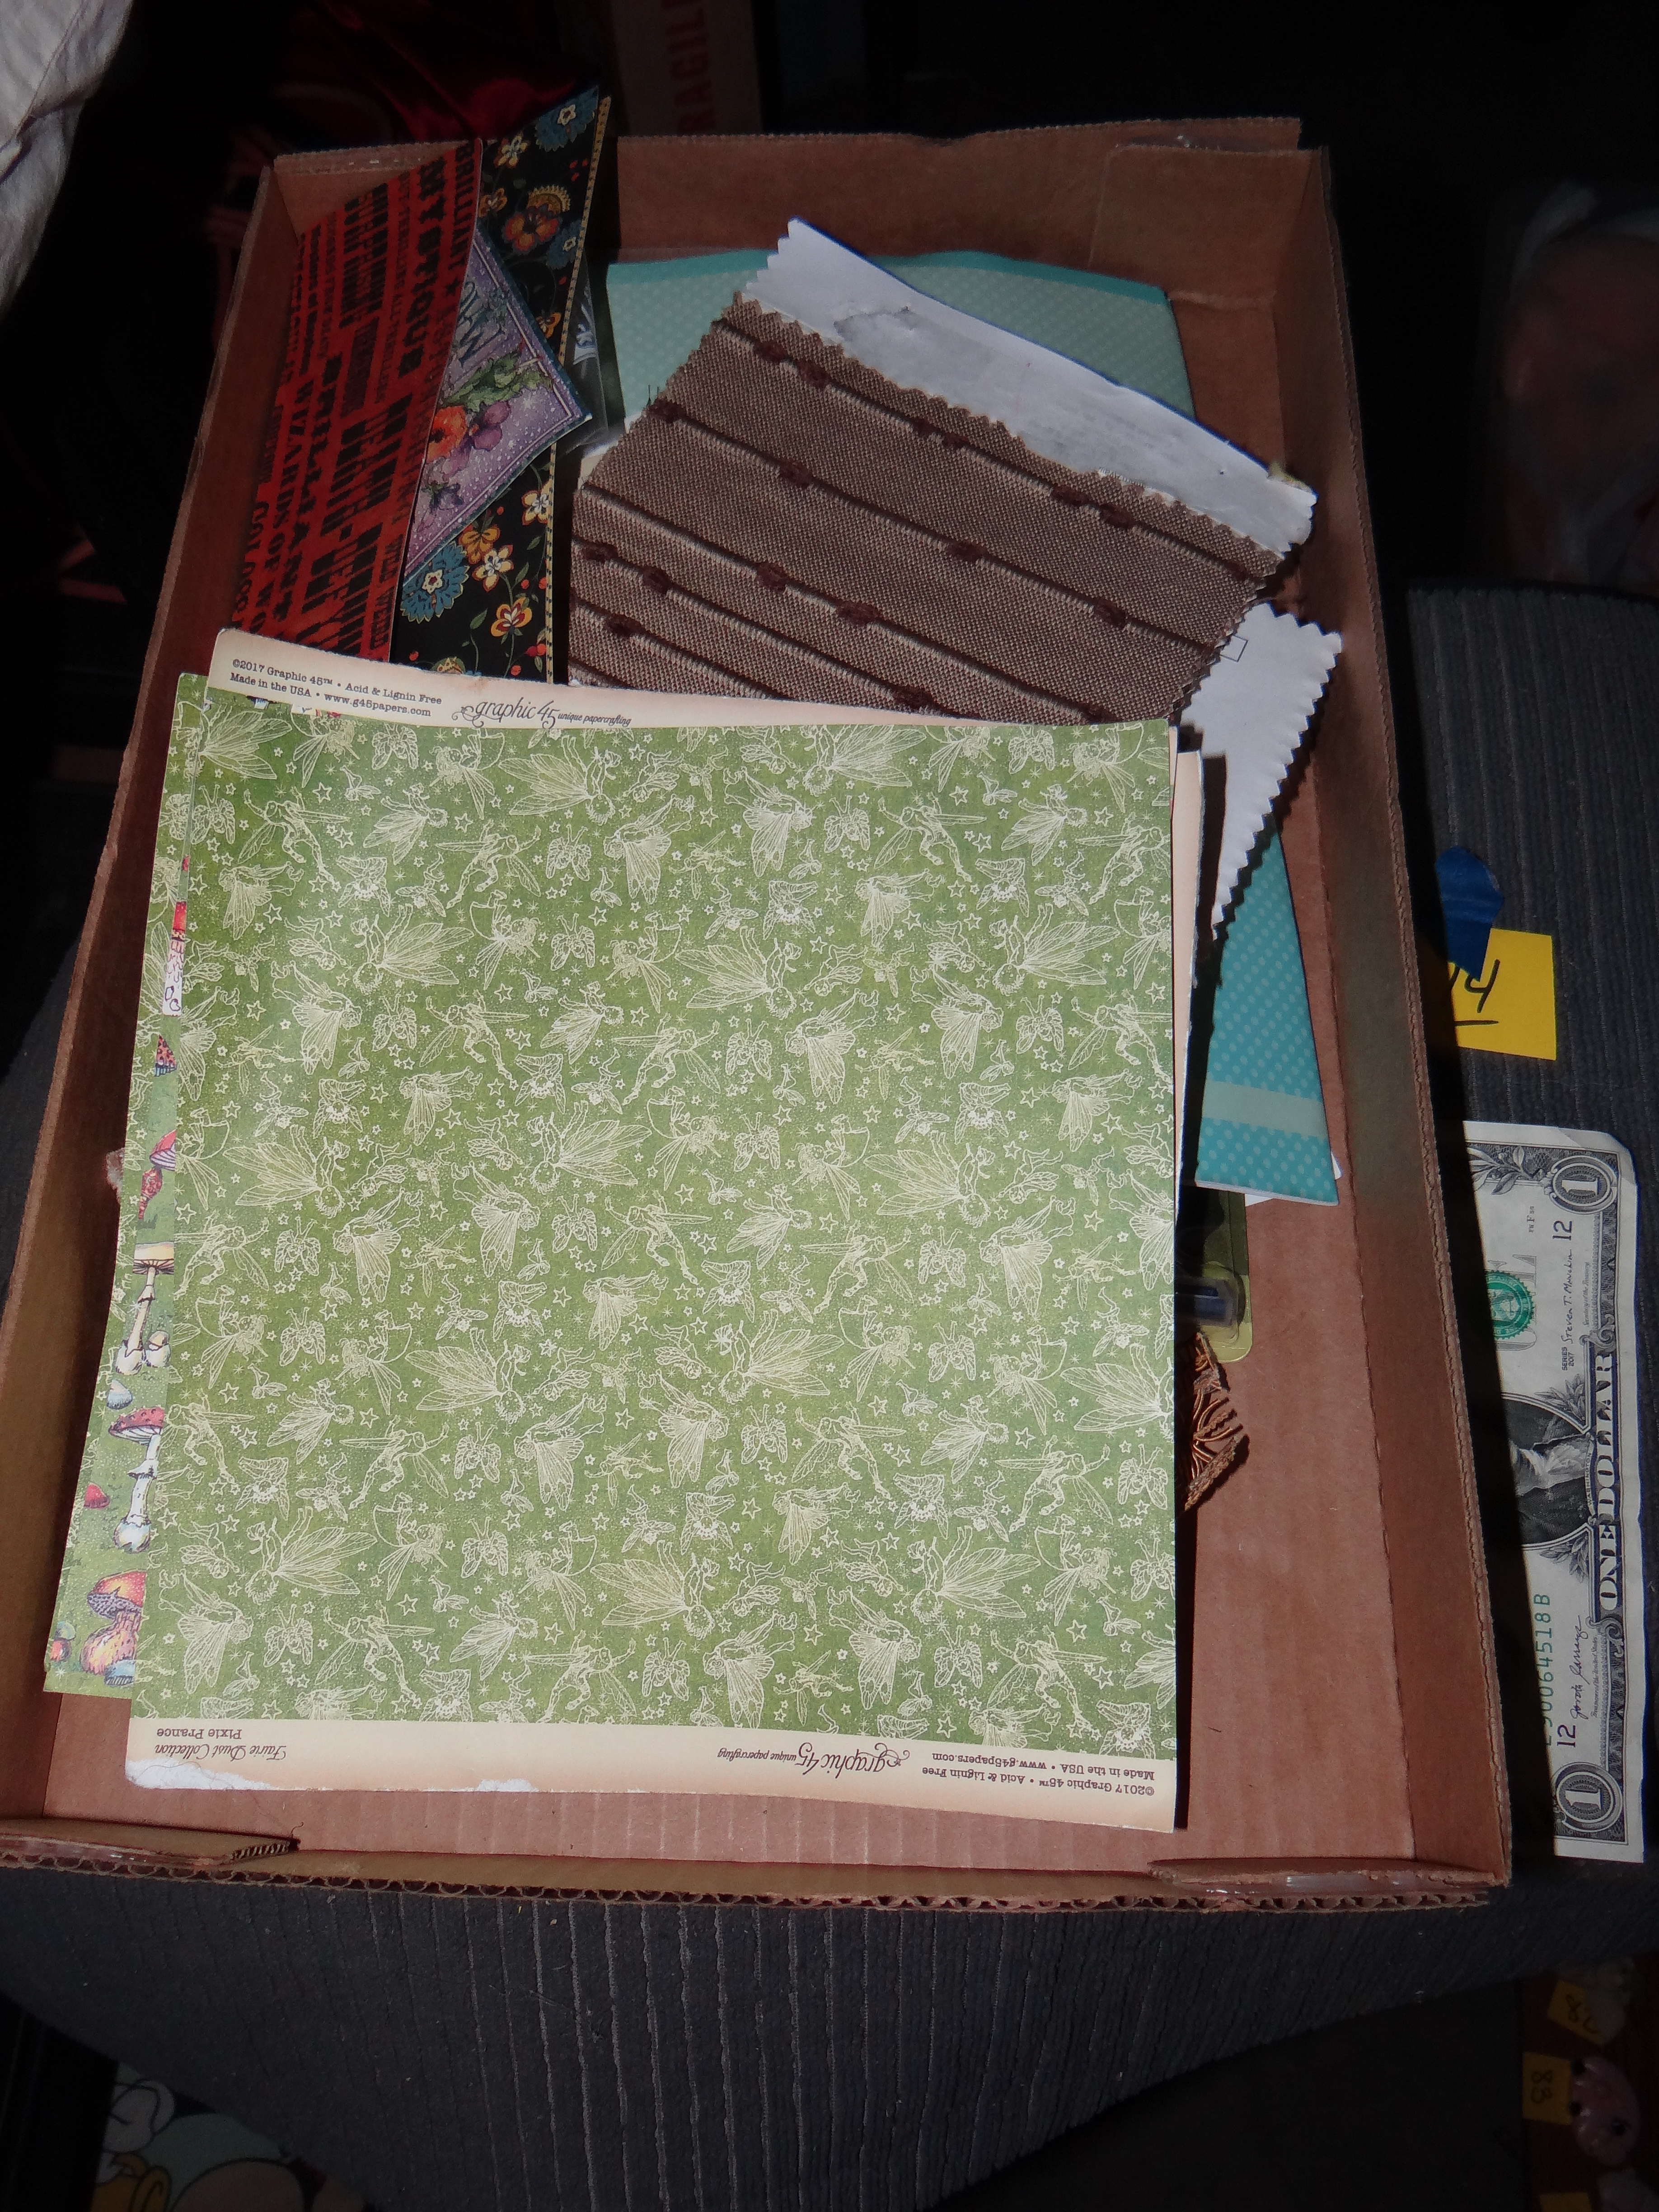 14-Flat of Scrapbooking Items, Greeting Crads, Fabric Swatches & More